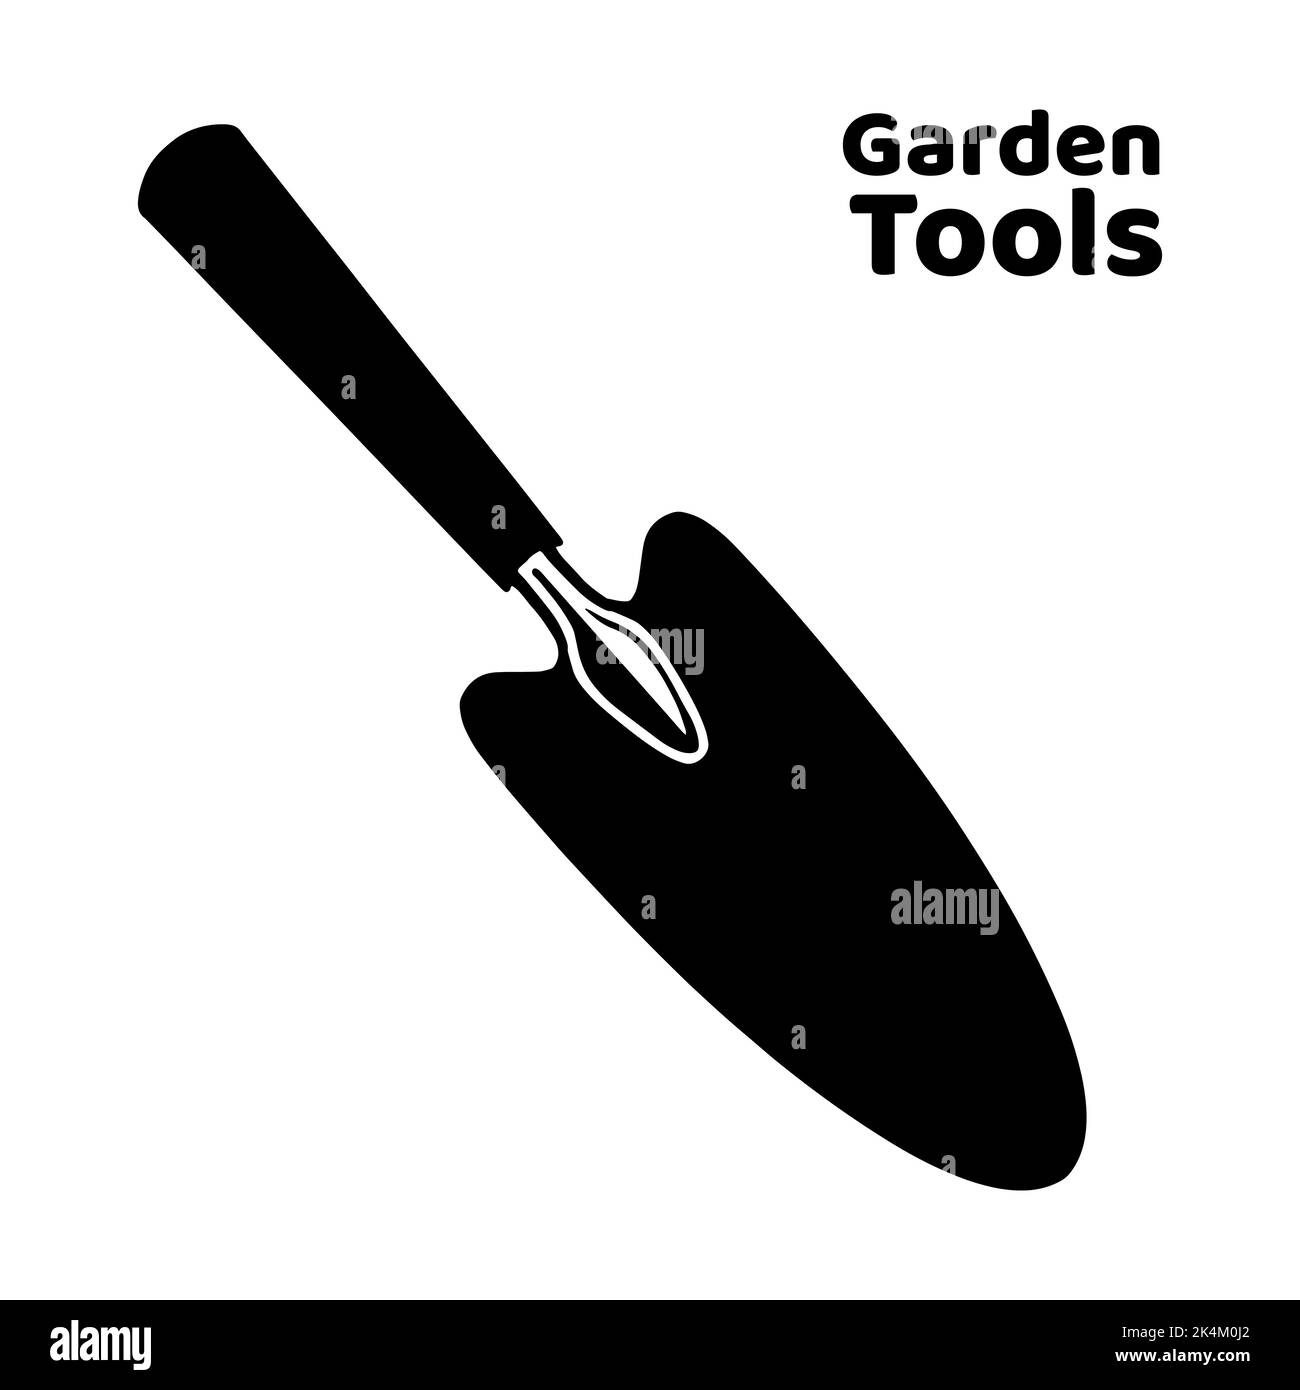 Hand scoop for digging and planting seedlings. Gardening Tools. Flat style icon. Isolated on white background. Vector. Stock Vector